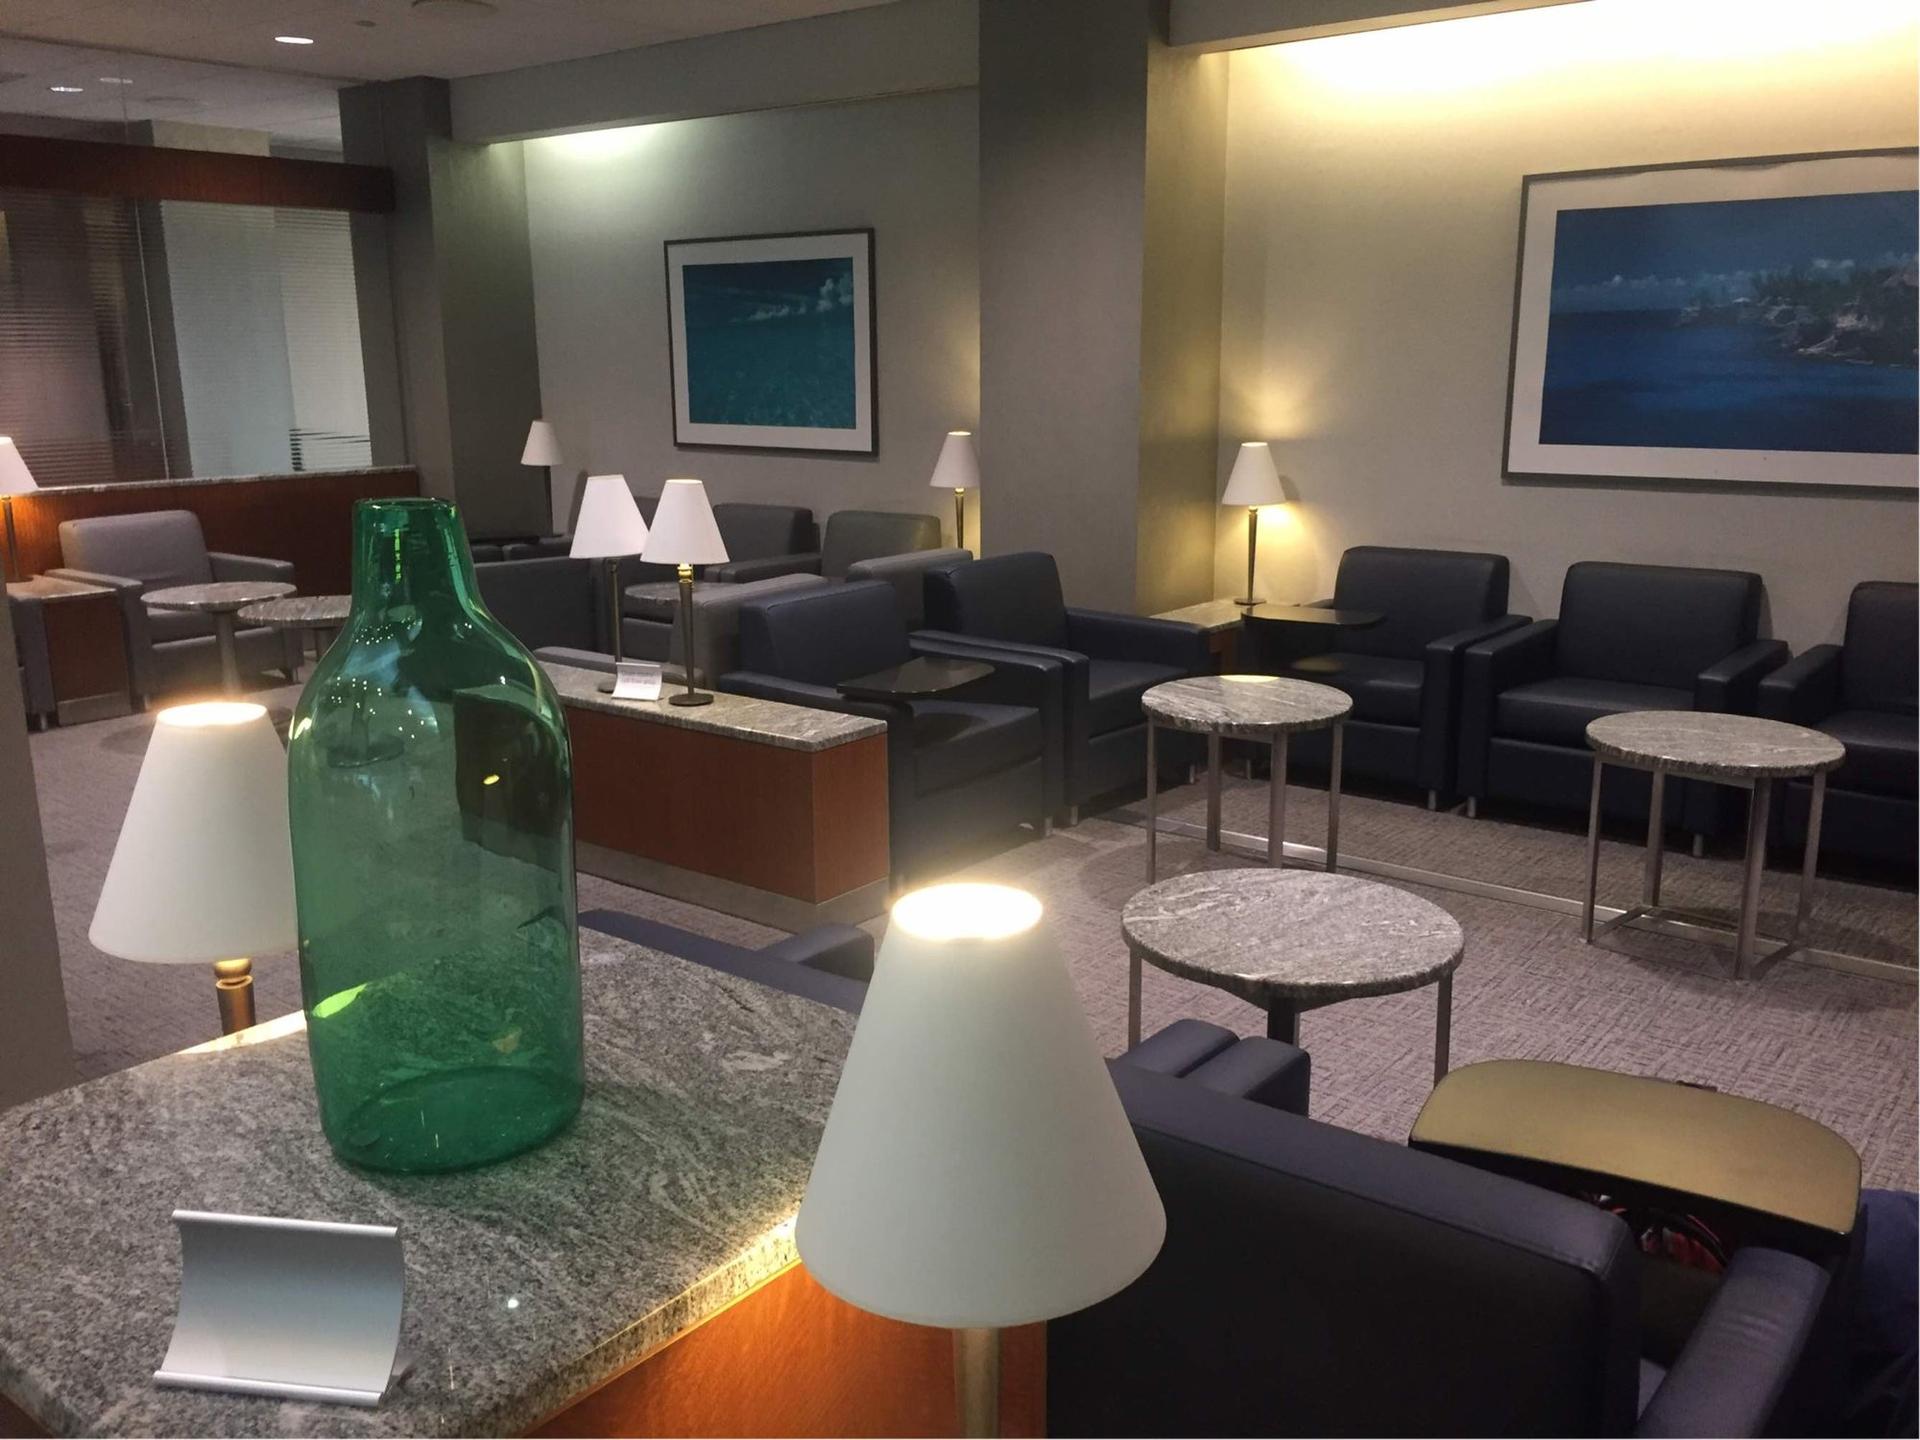 American Airlines Admirals Club image 15 of 48